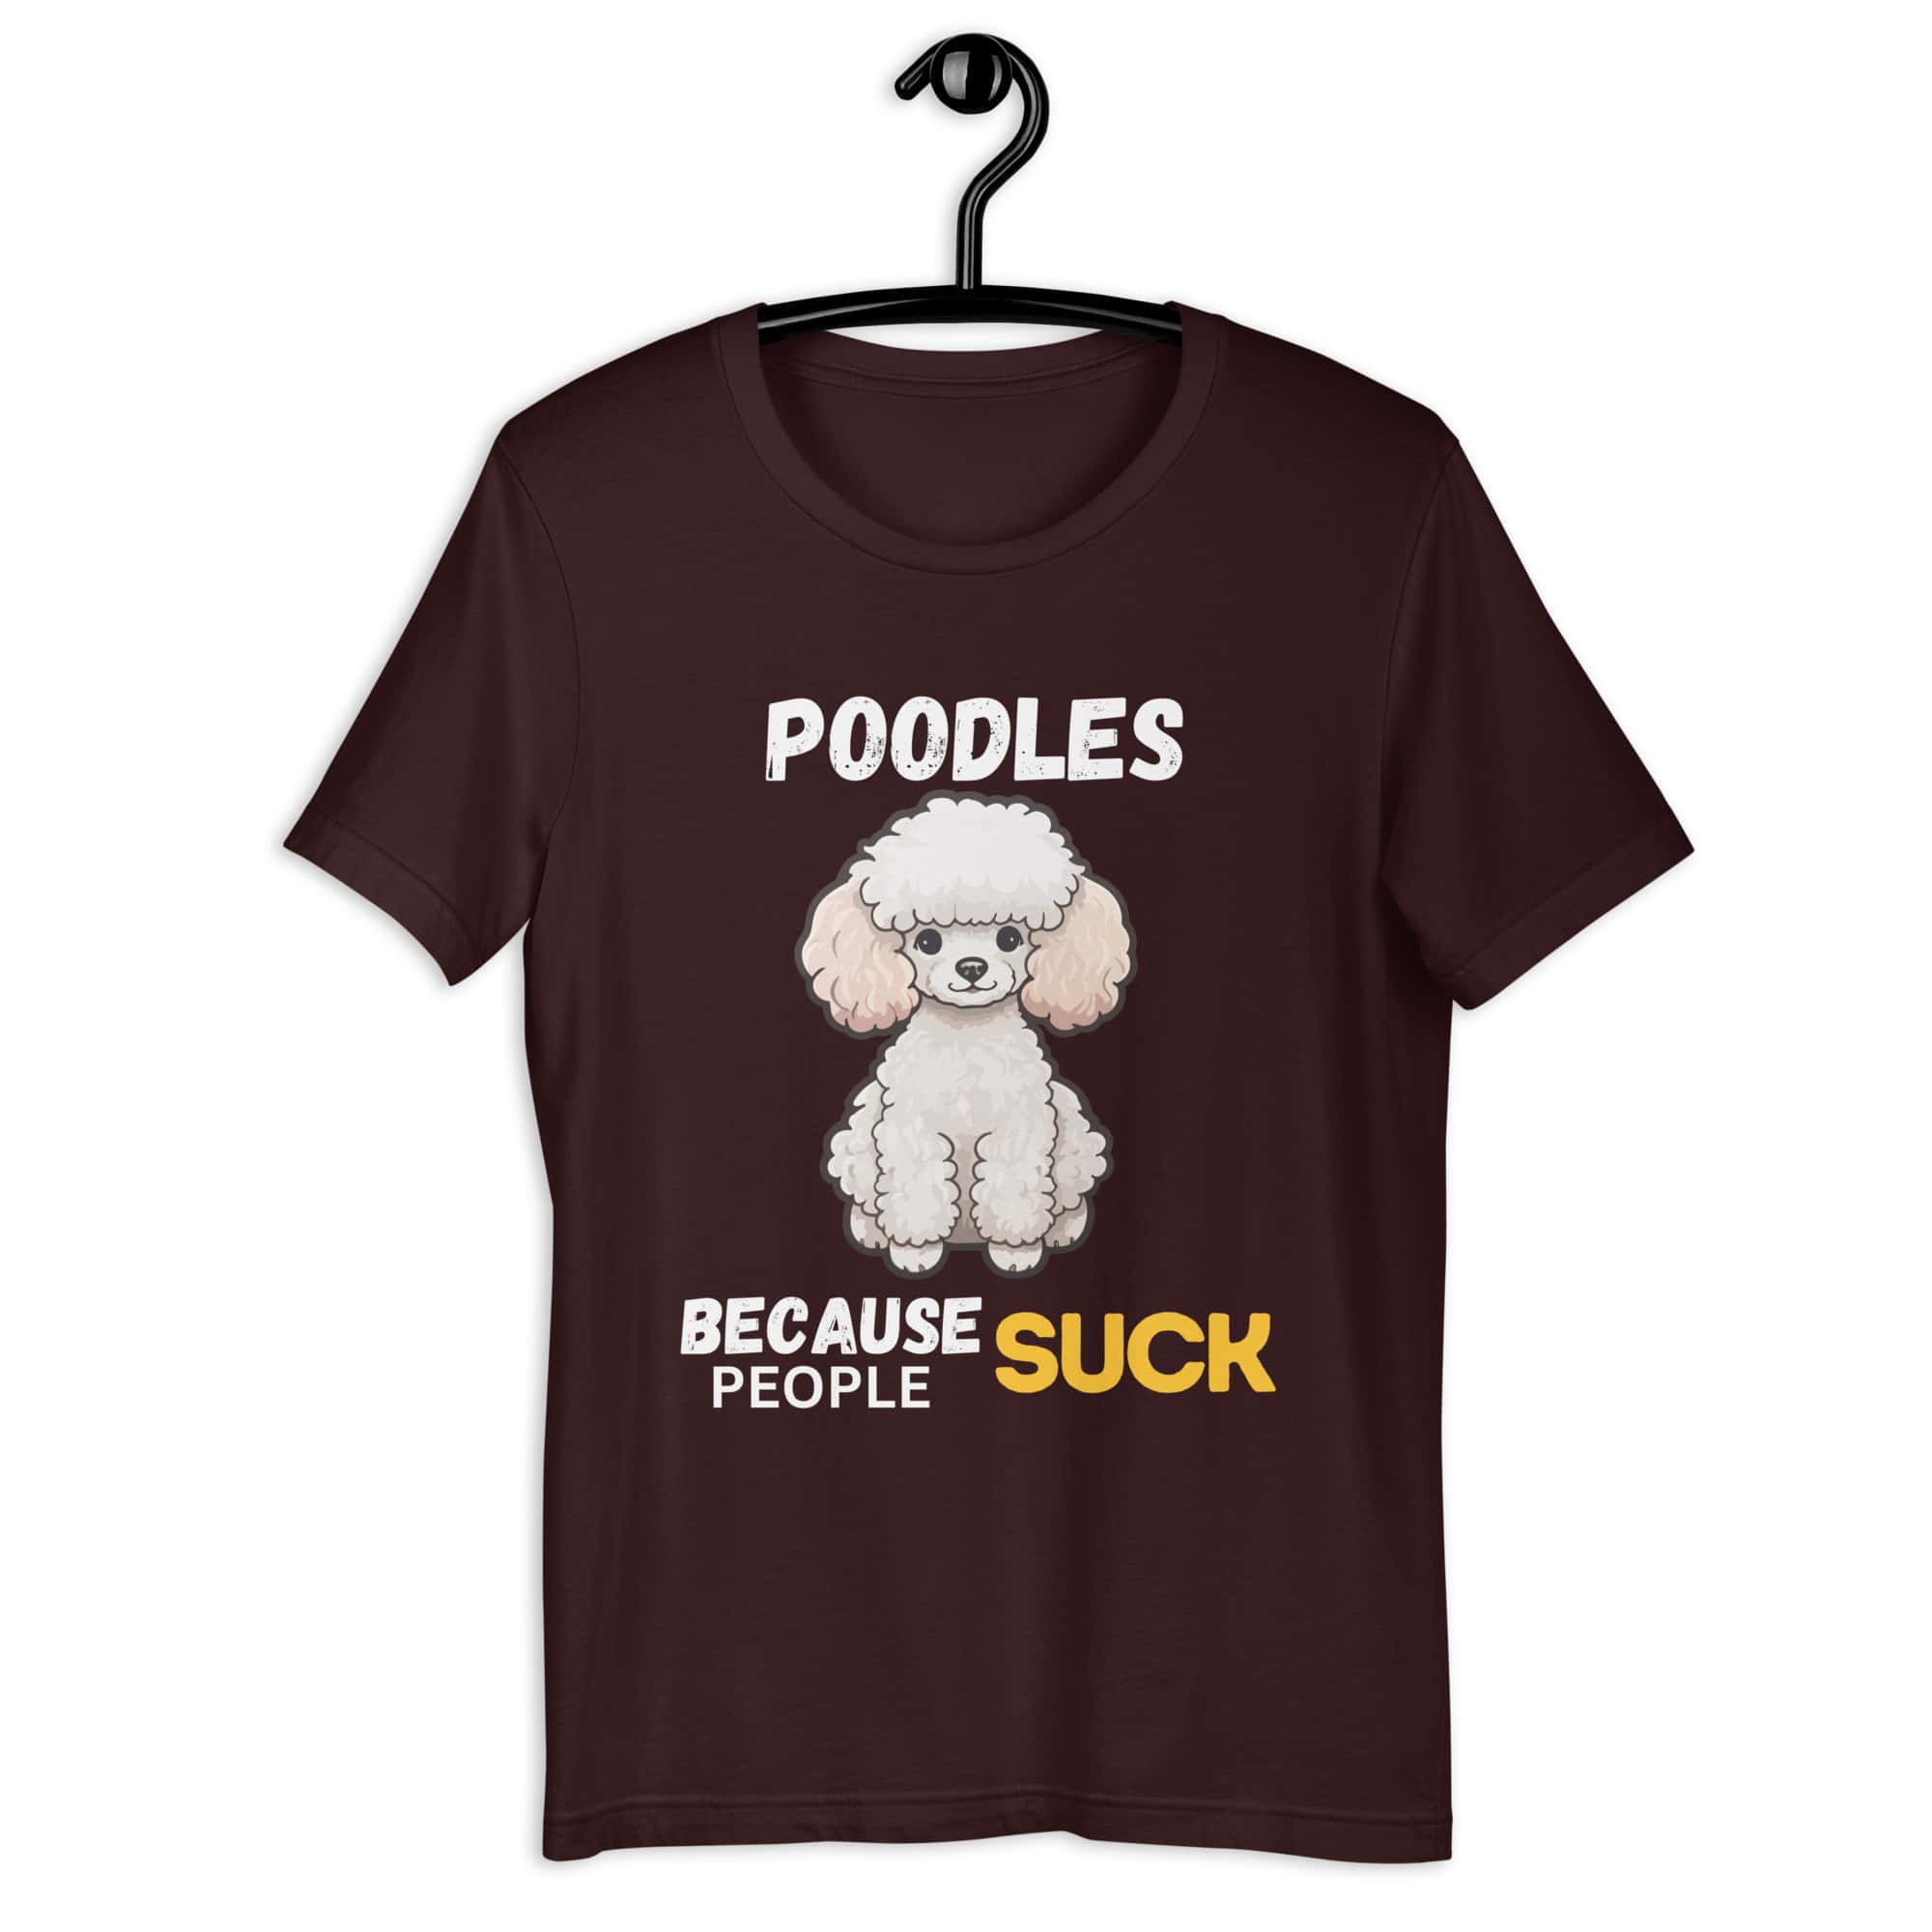 Poodles Because People Suck Unisex T-Shirt brown